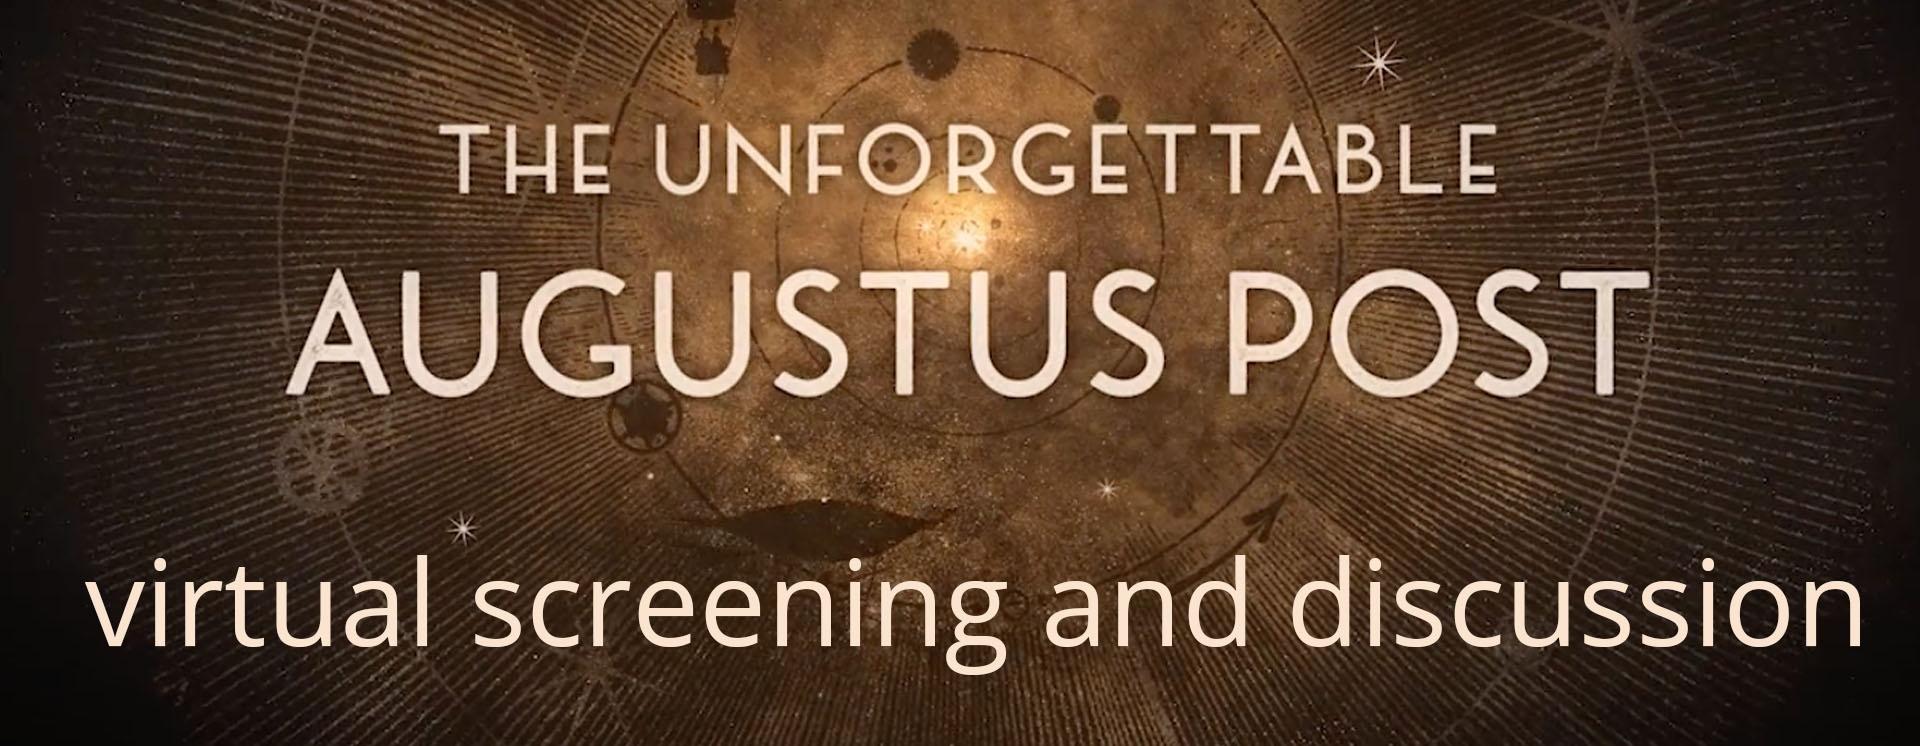 The Unforgettable Augustus Post virtual screening and discussion